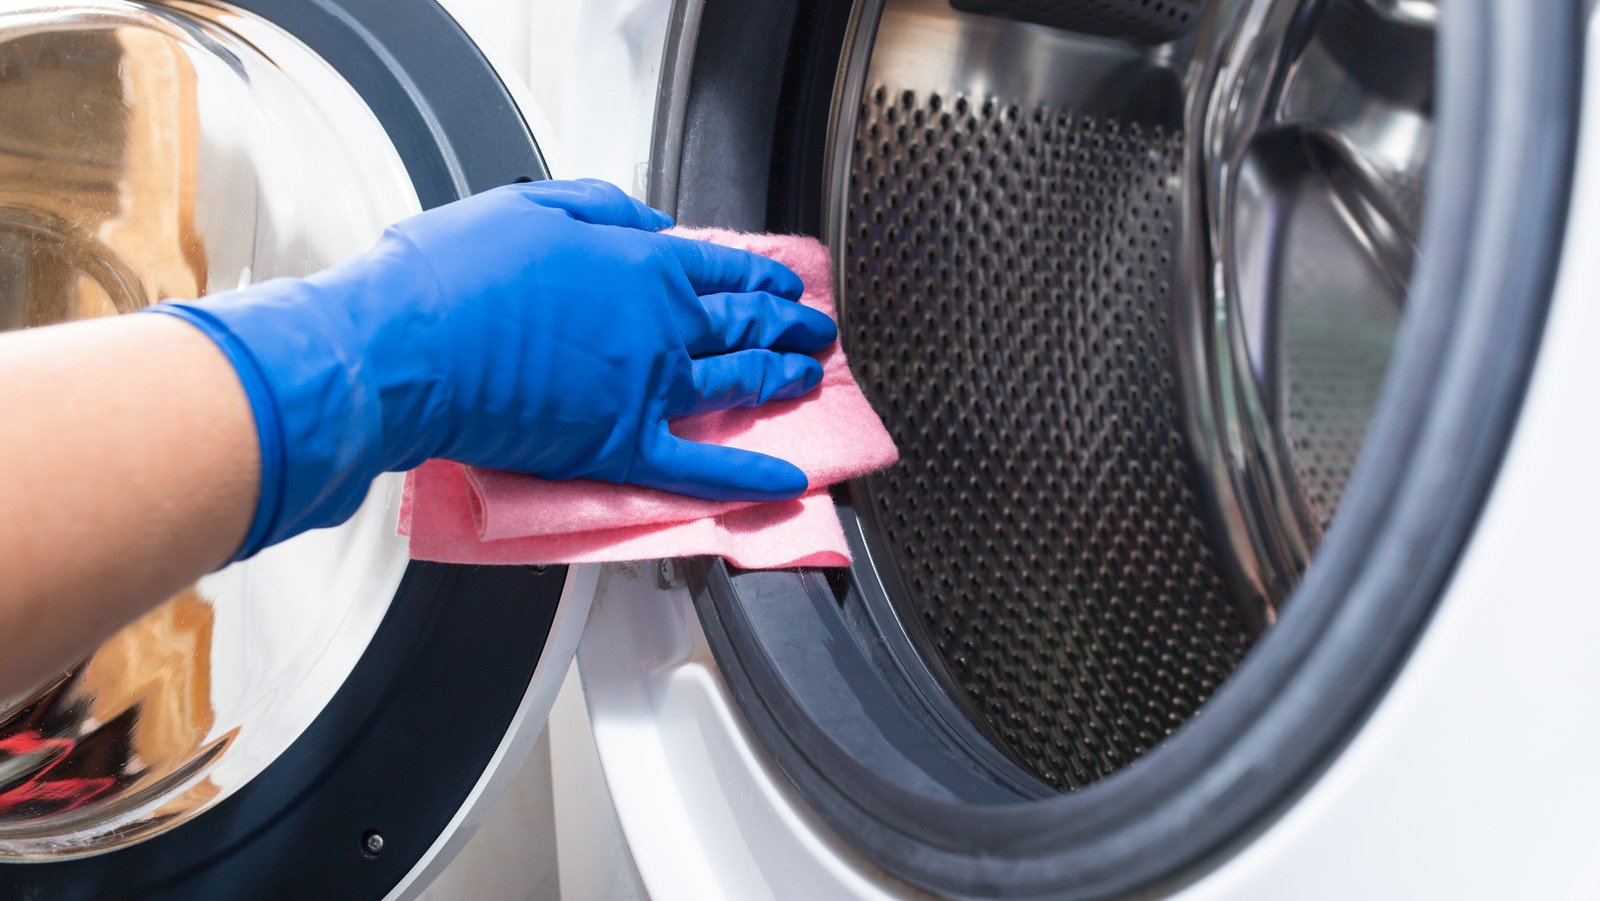 The Top 10 Washing Machine Cleaners To Keep Your Appliance In Good Shape